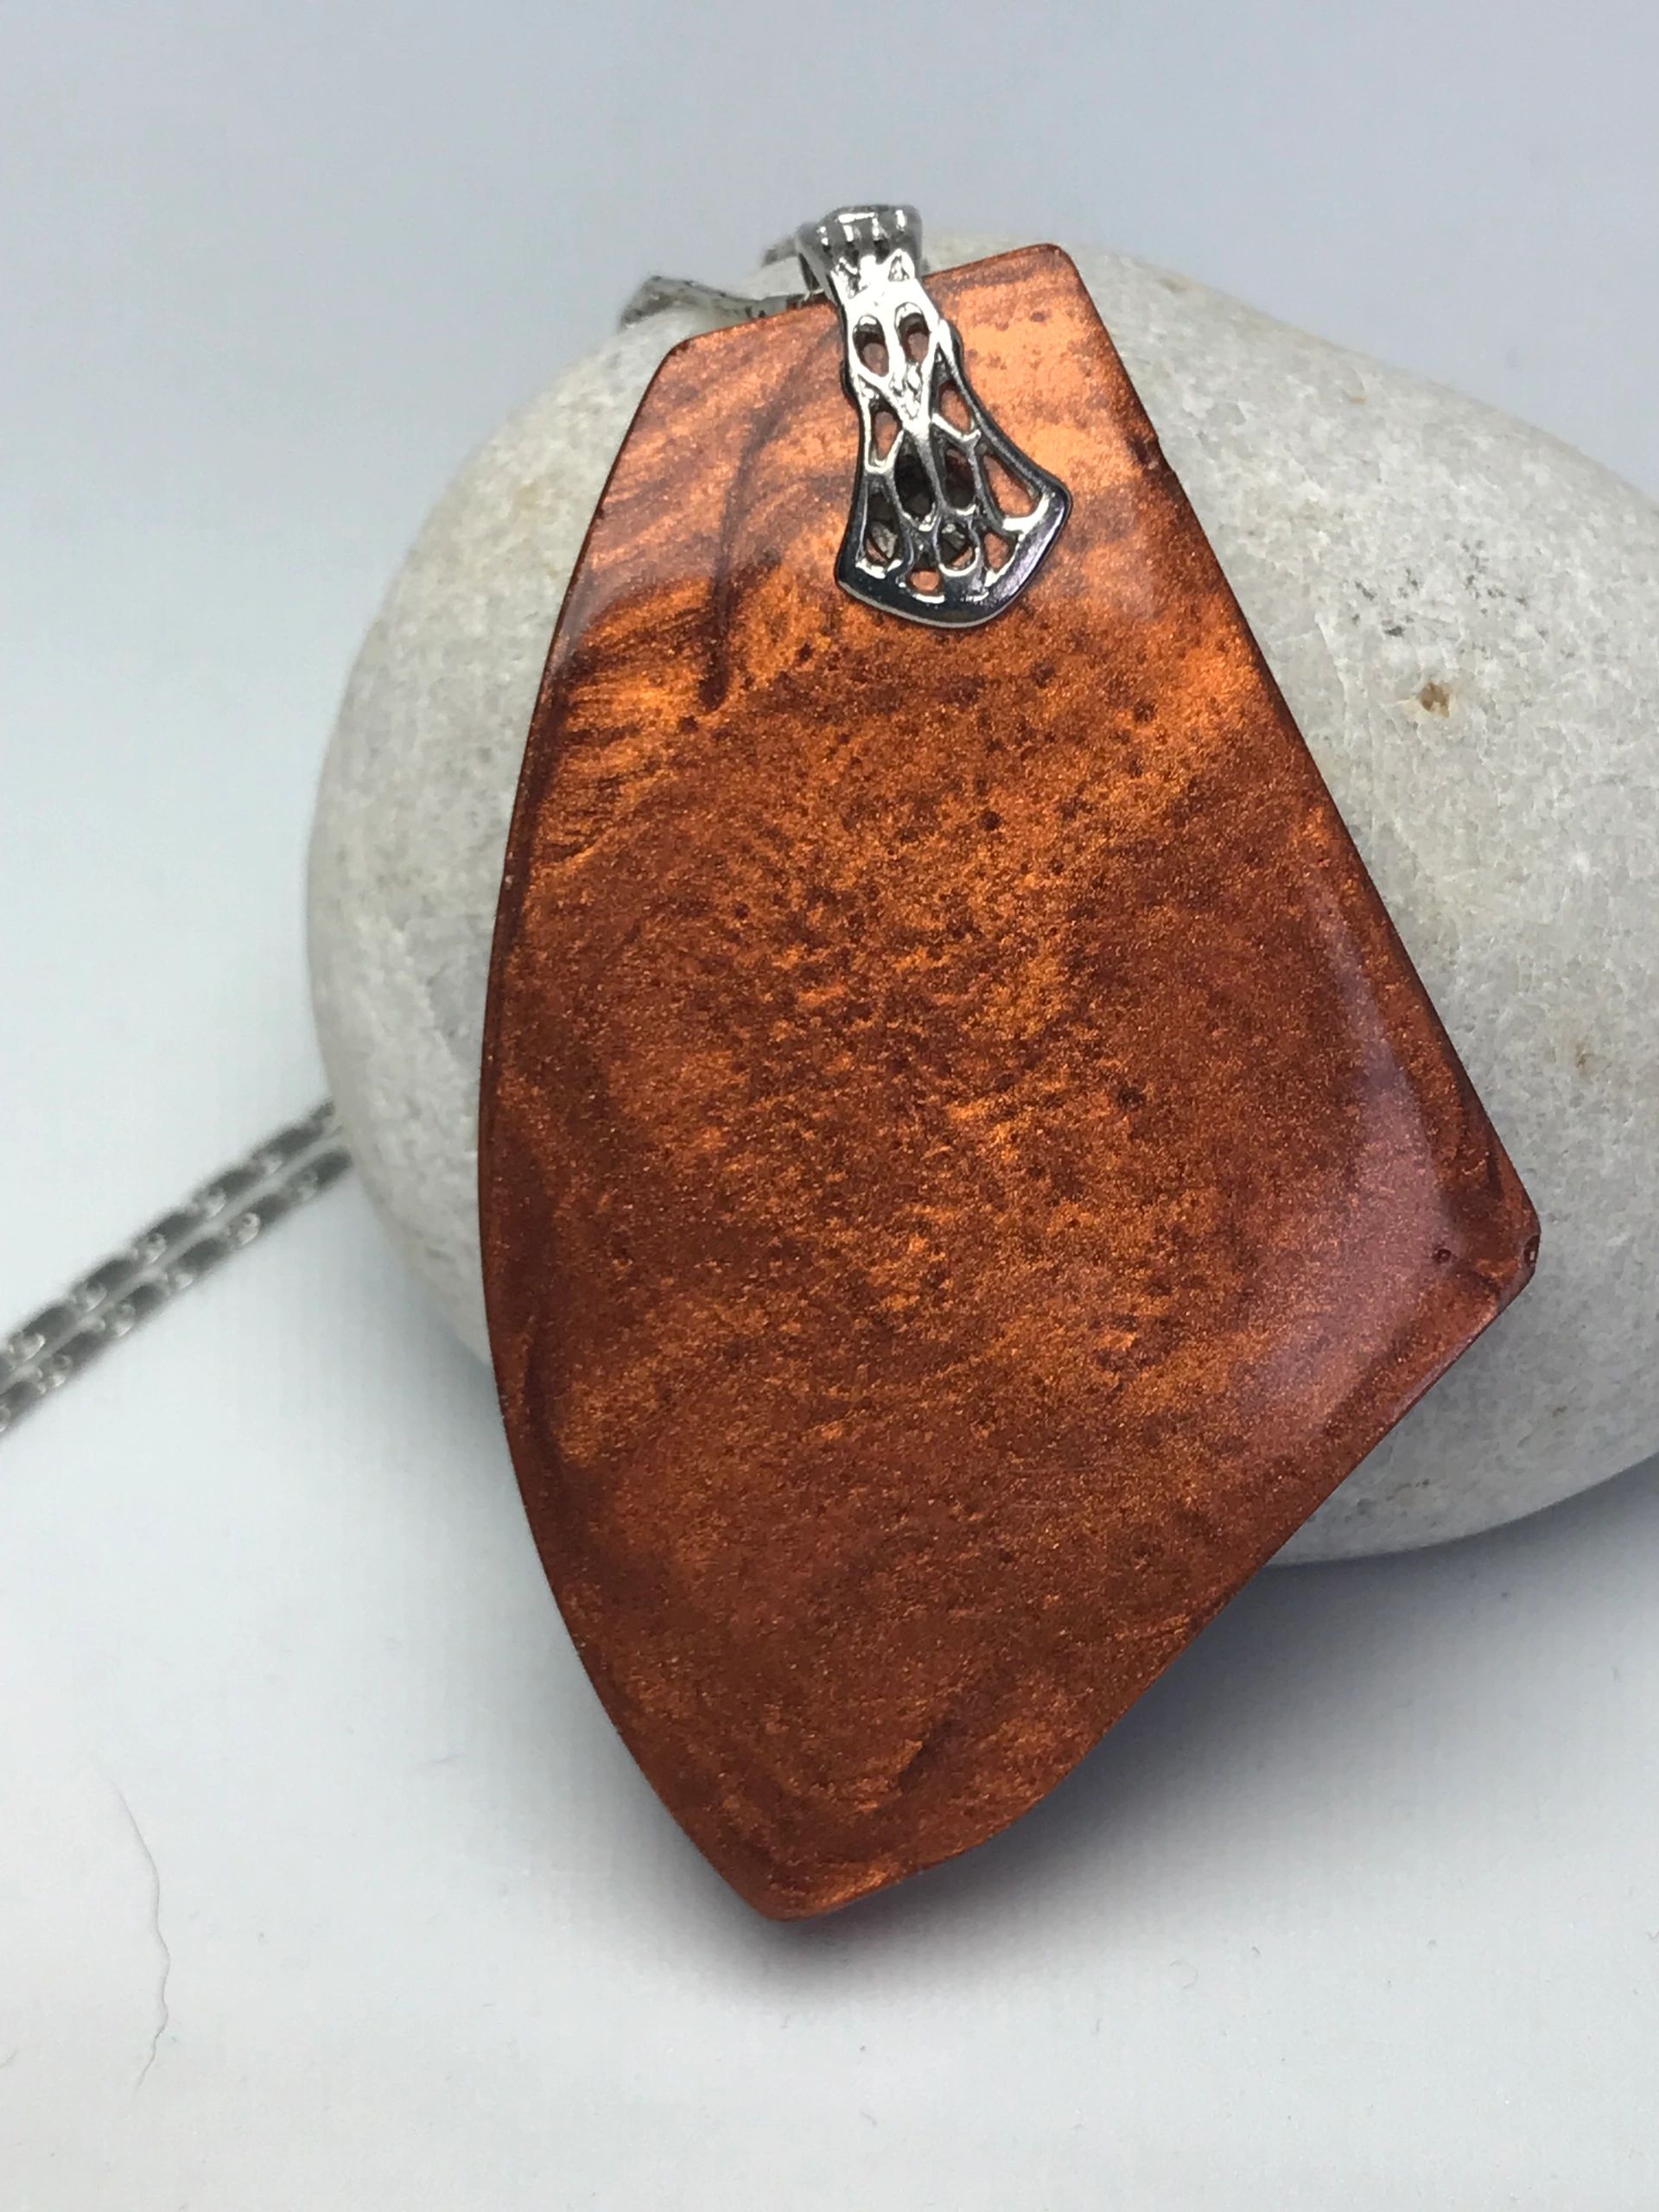 Coper coloured resin pendant with silver necklace bail. Pendant is resin on a stone.